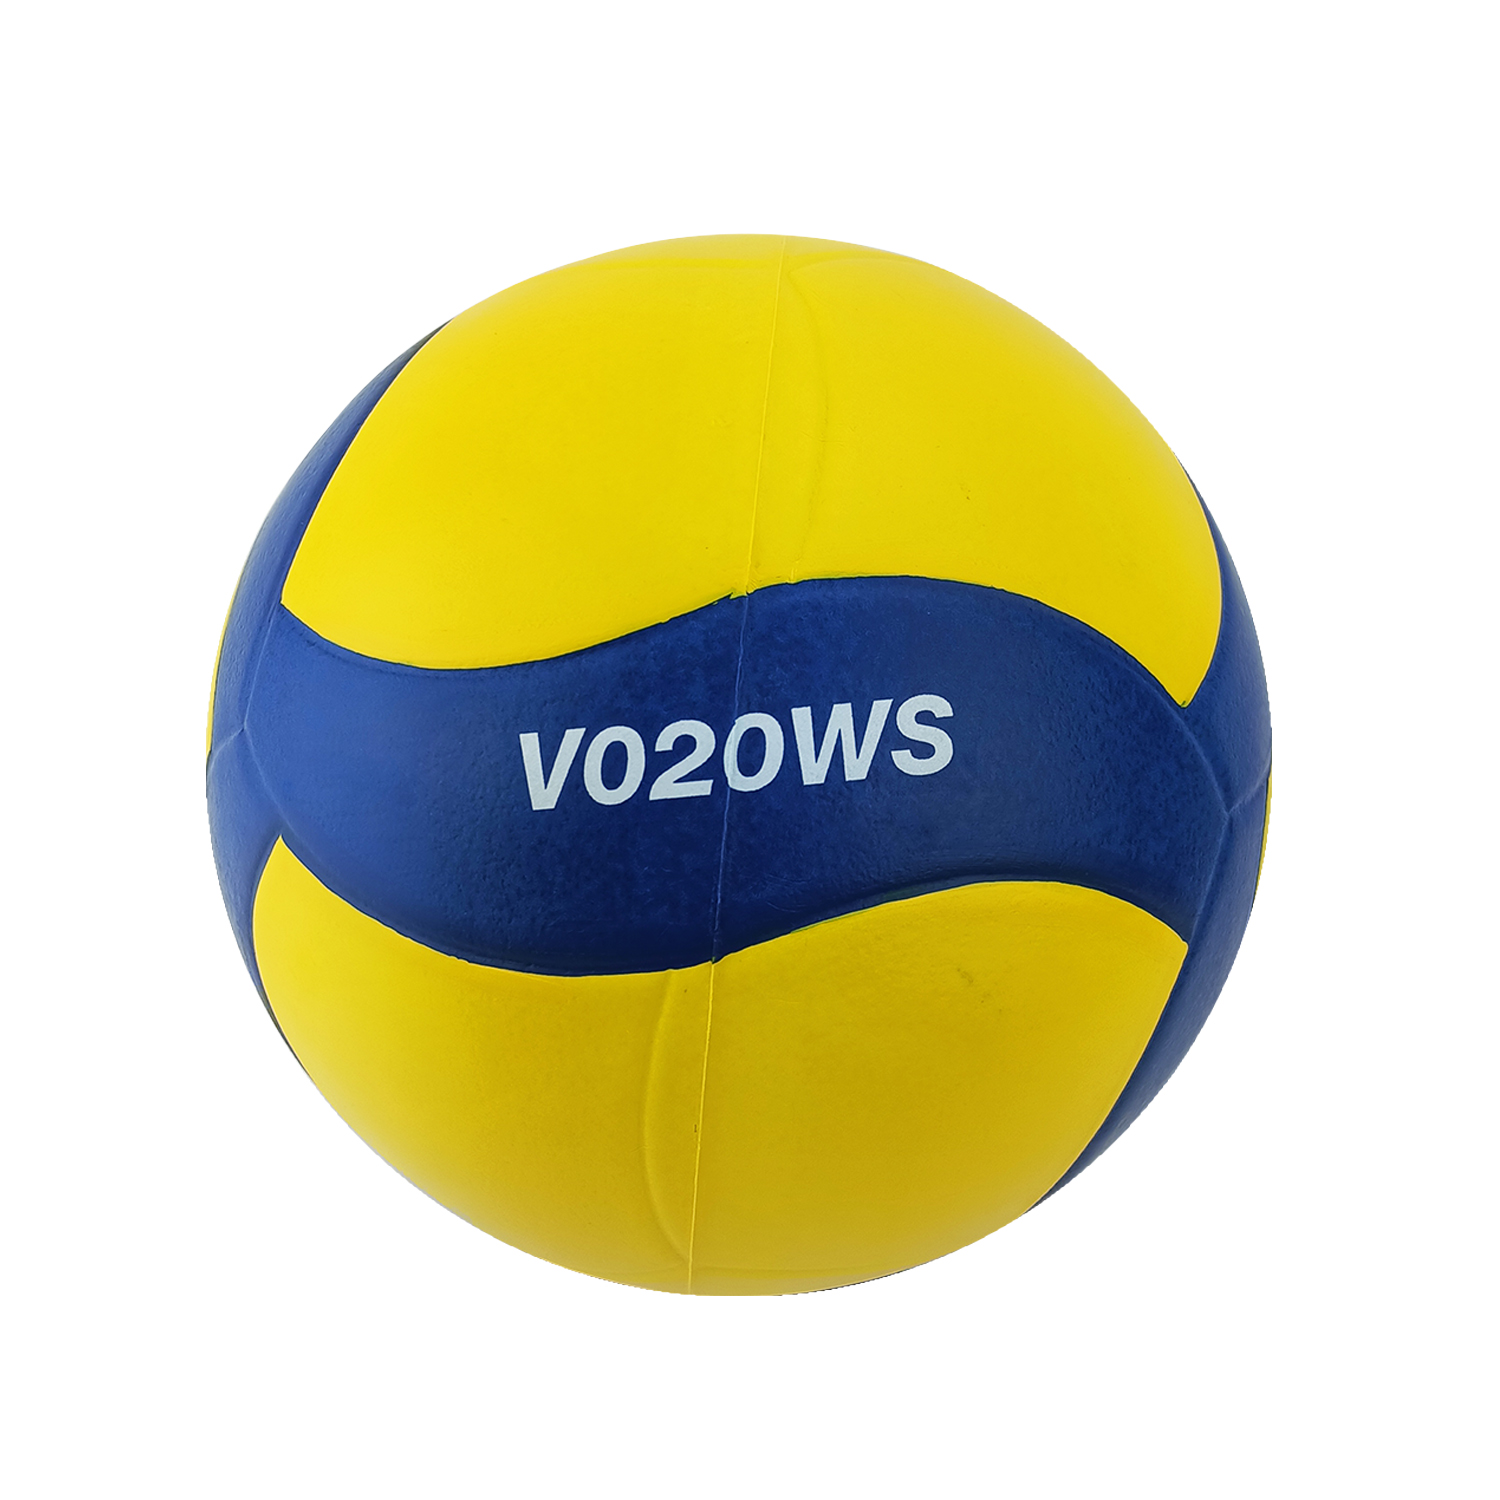 MIKASA V020WS VW SERIES VOLLEYBALL RUBBER SIZE 5